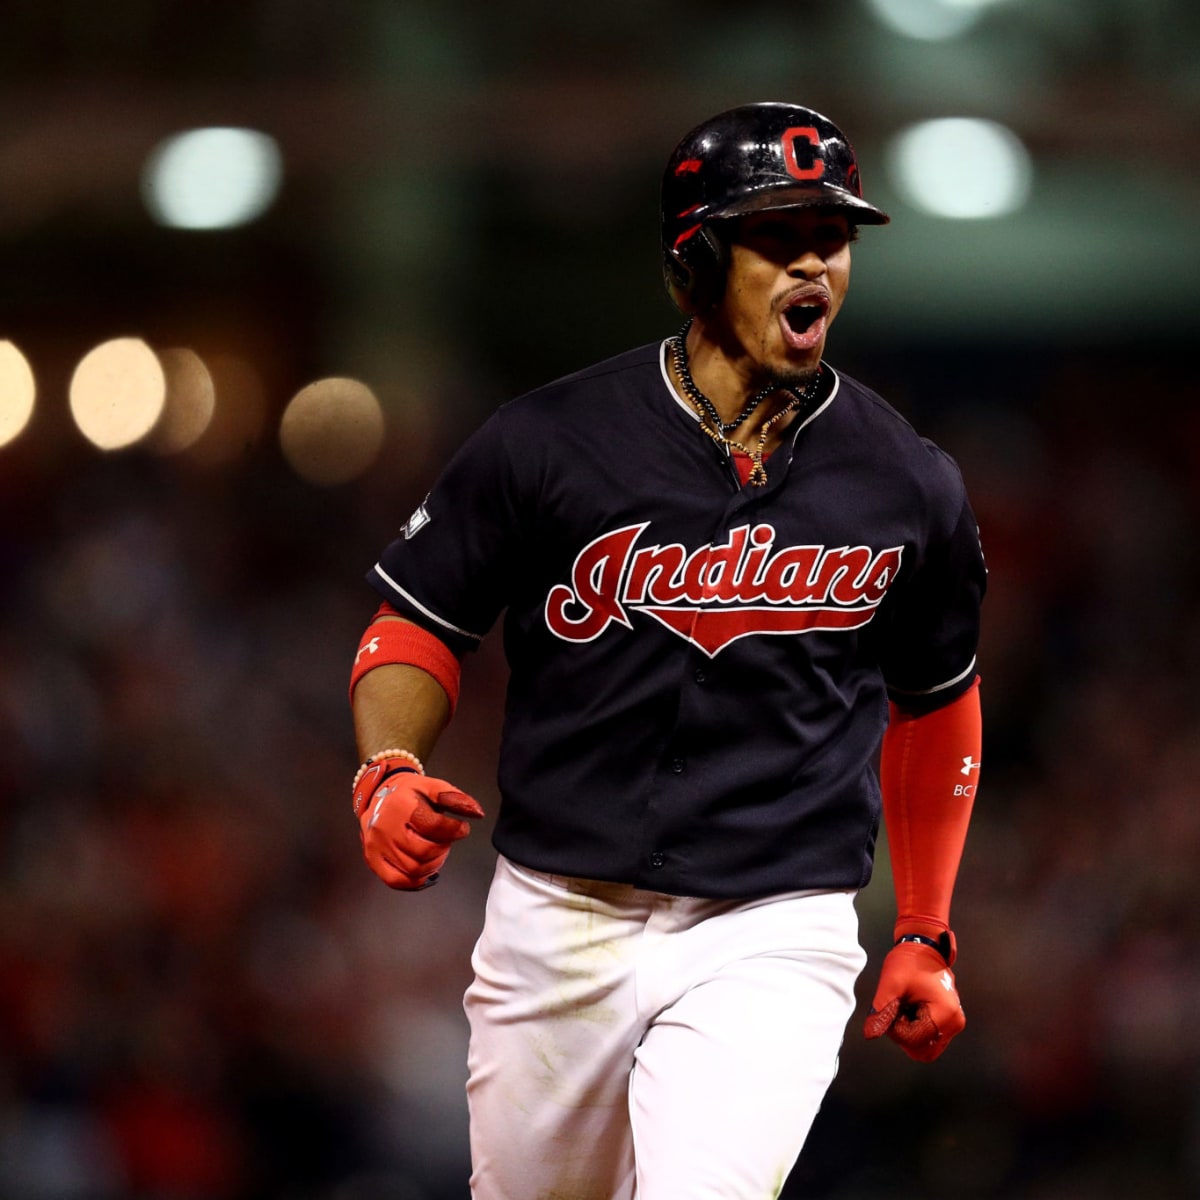 New York Mets and All-Star Francisco Lindor agree on a 10-year